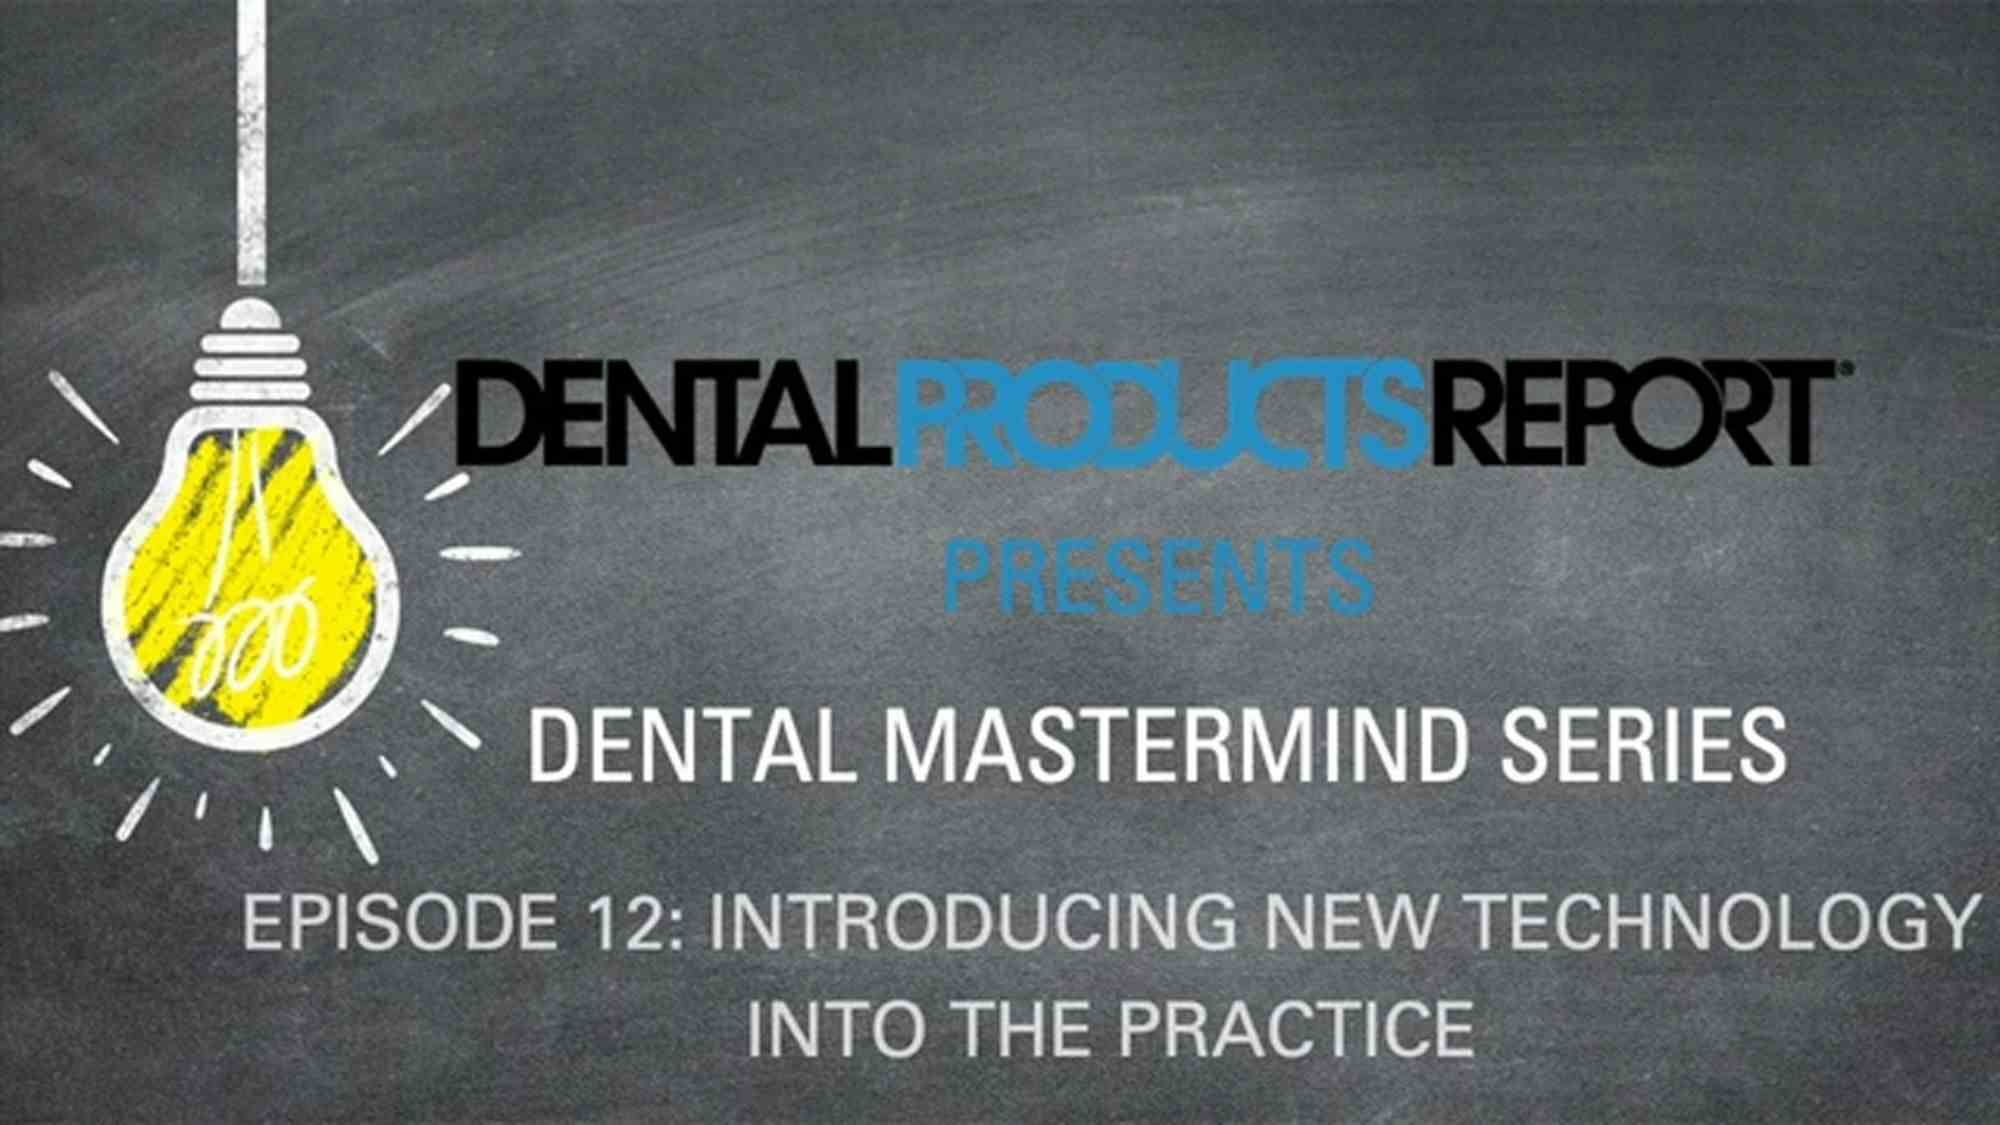 Mastermind - Episode 12 - Introducing New Technology into the Practice